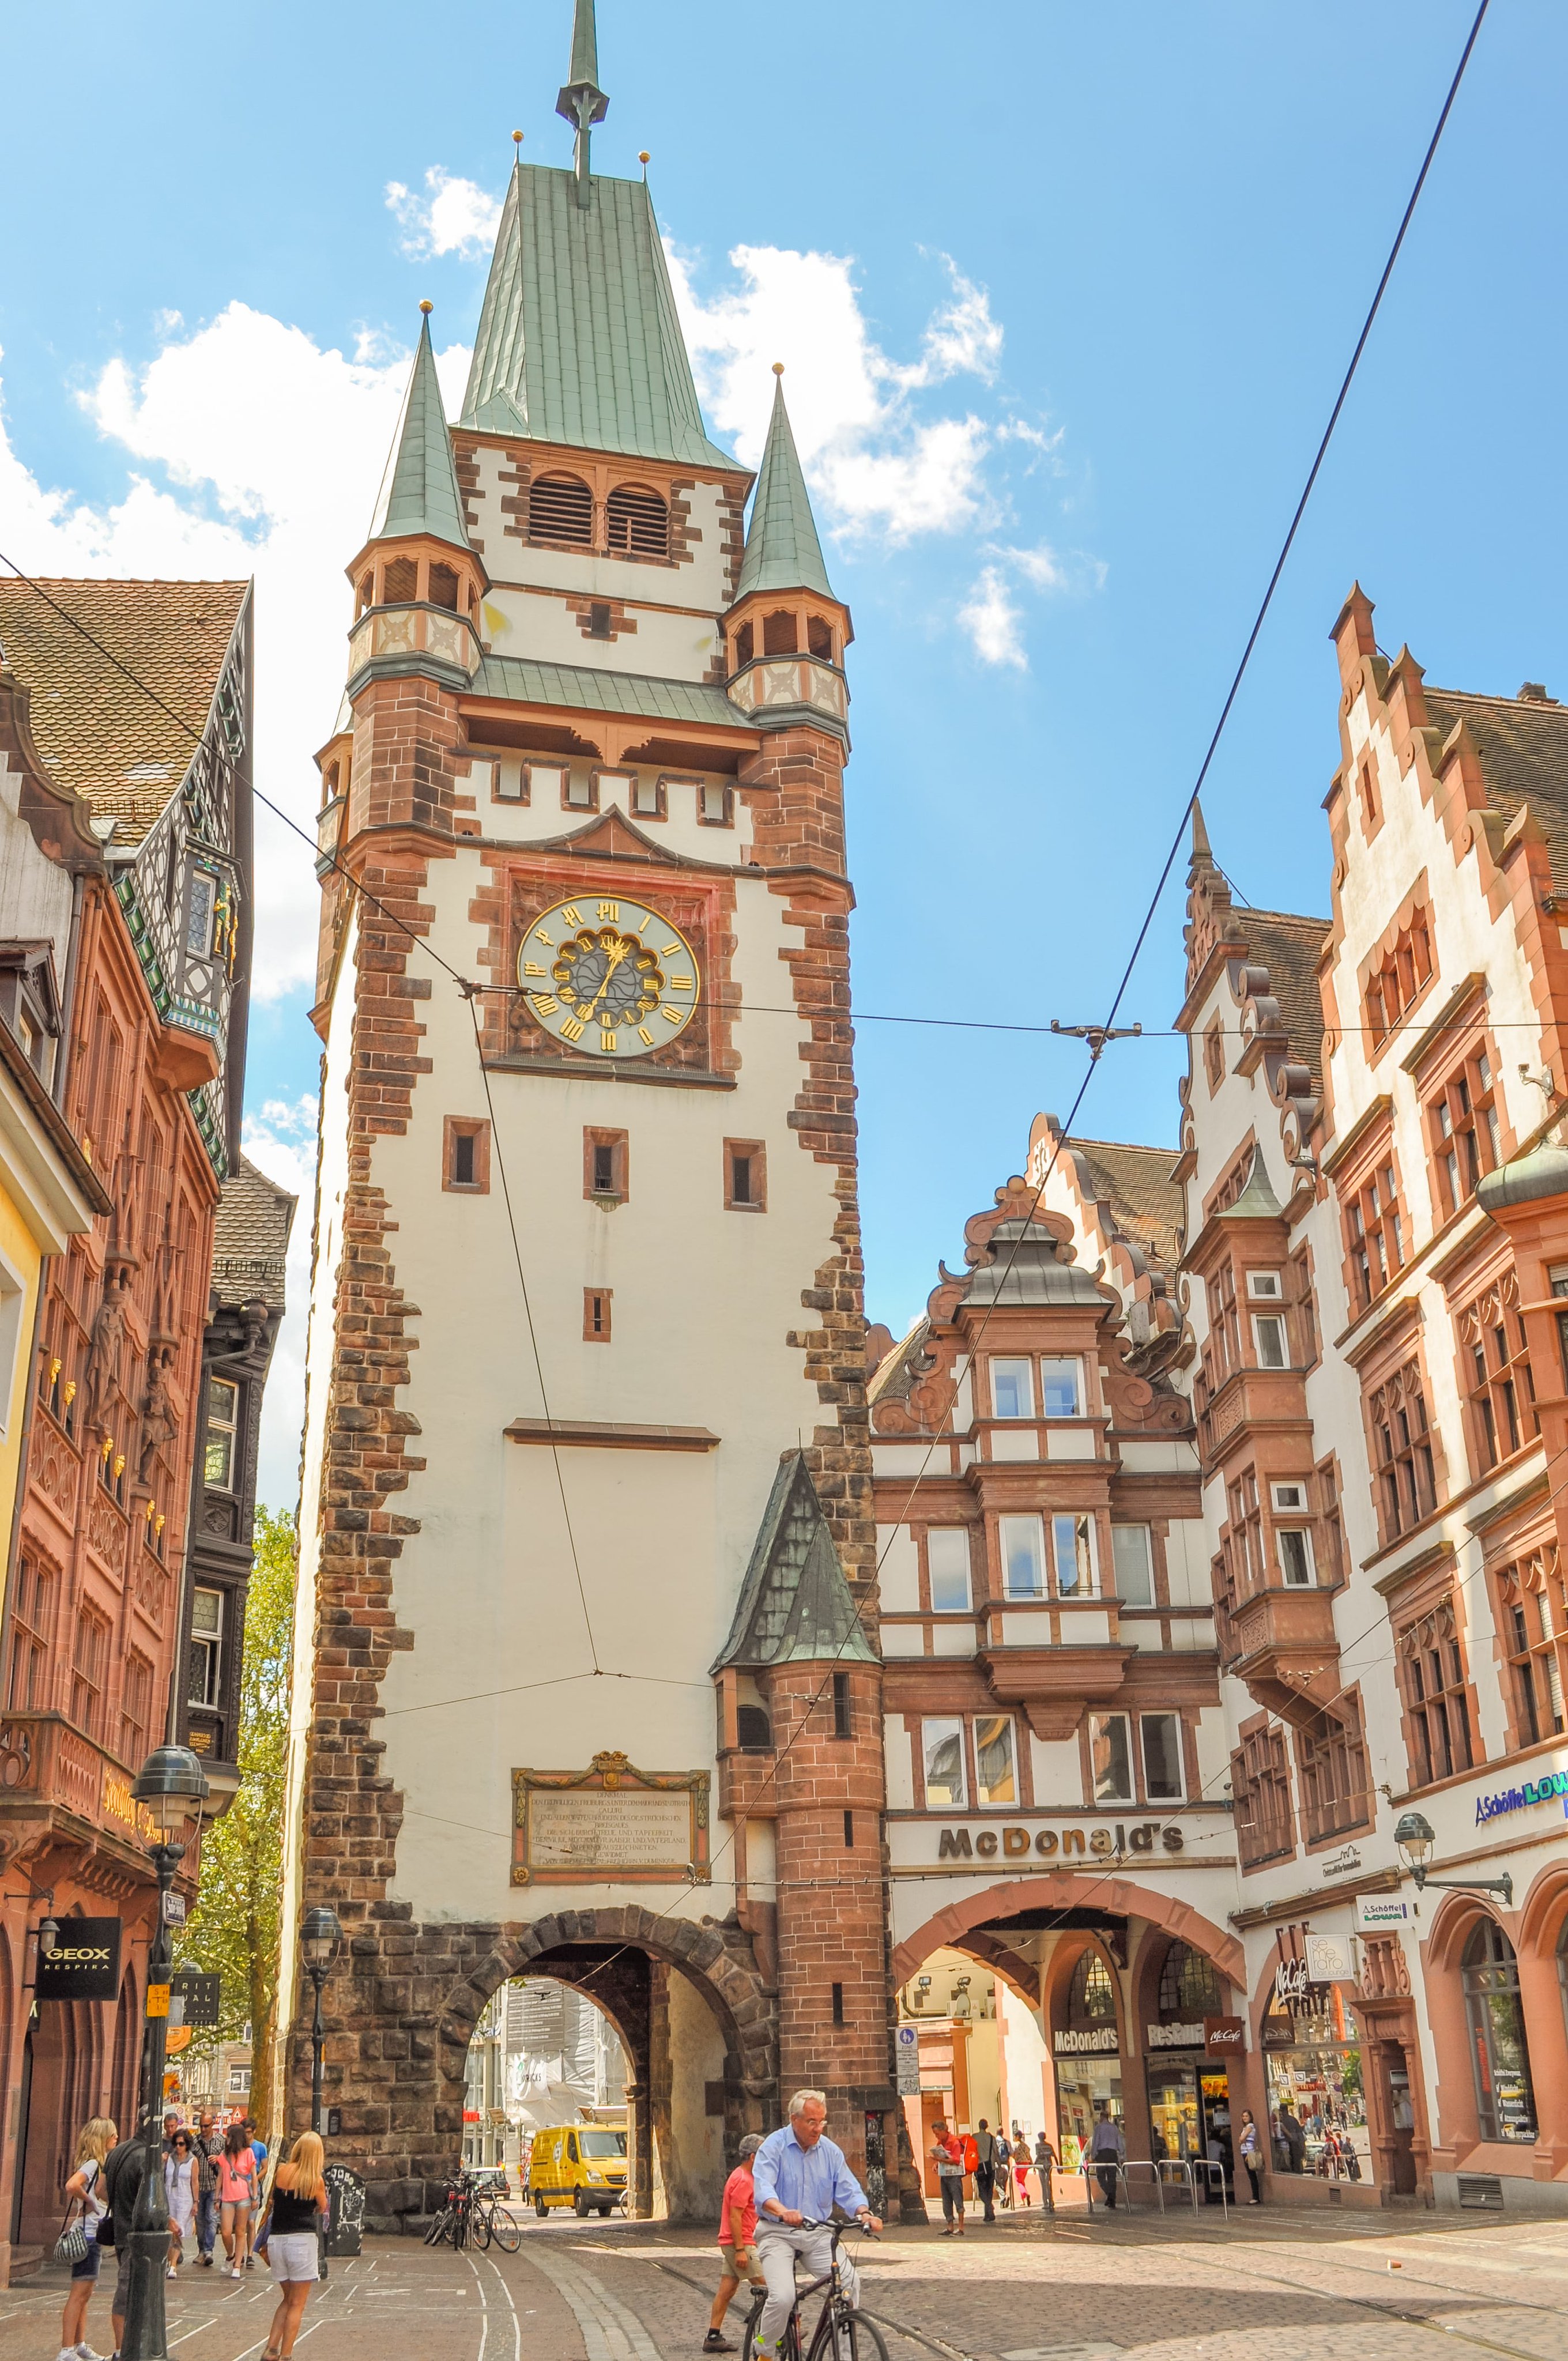 Historic Highlights on Twitter: "The Martinstor ( Martin's Gate), a former  town fortification, is the older of the two gates of #Freiburg that have  been preserved since medieval times. The gate was